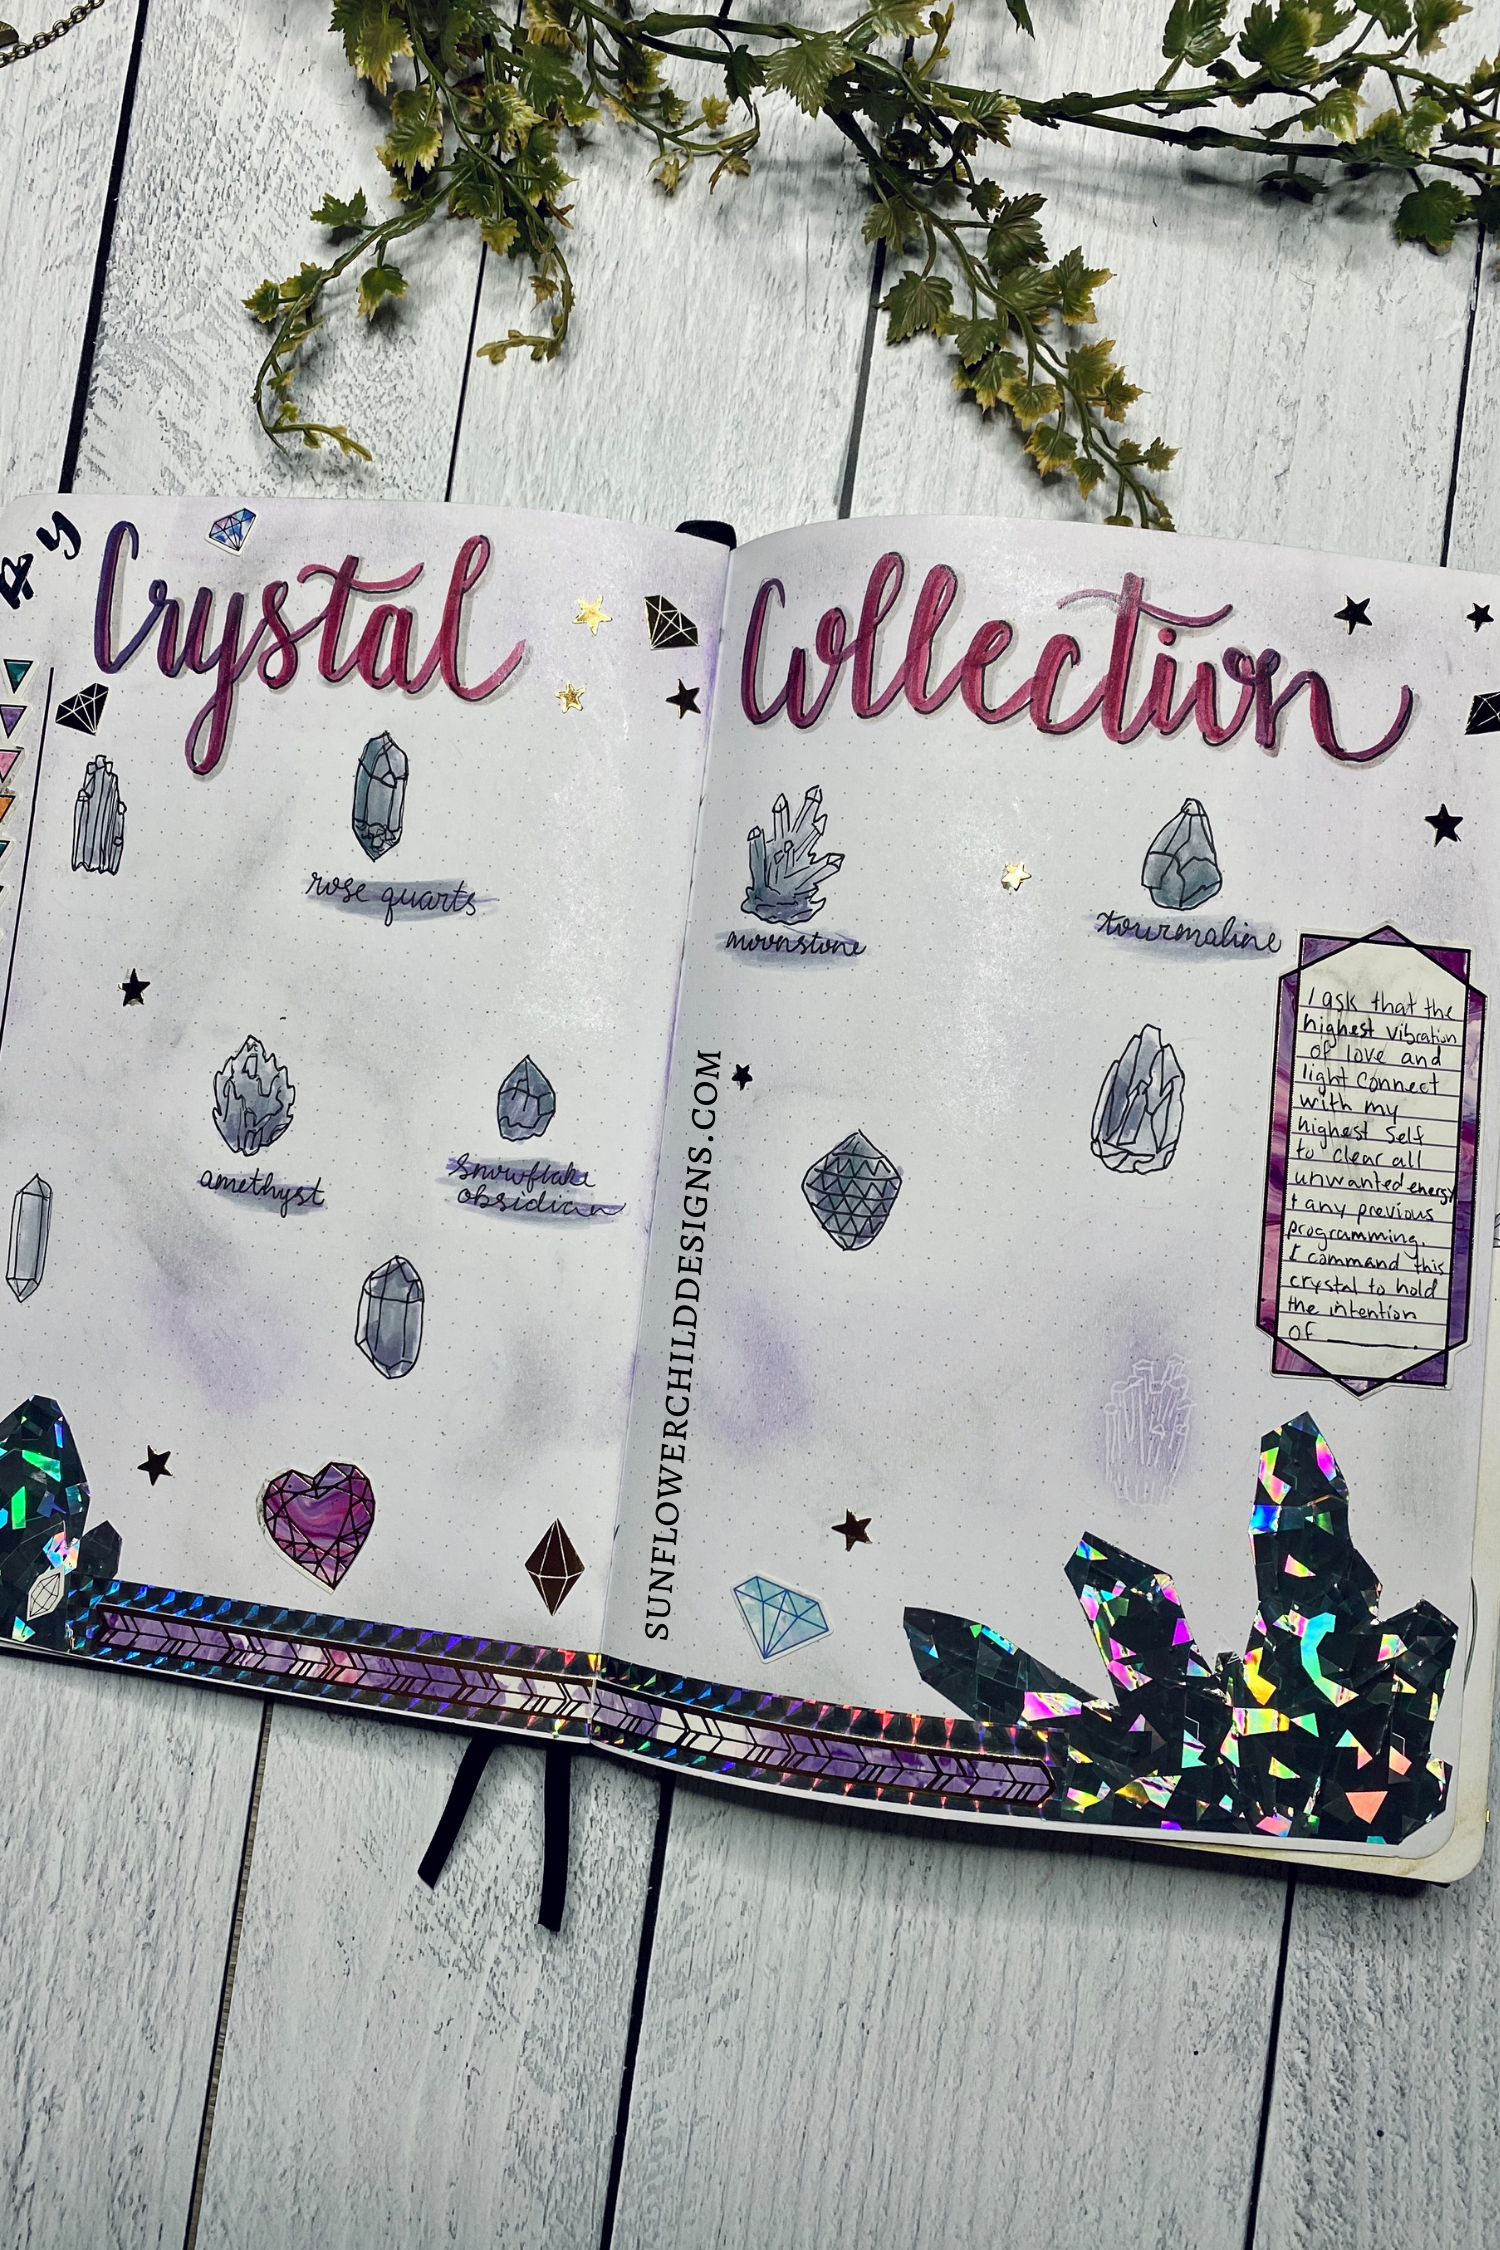 Crystal Collection 